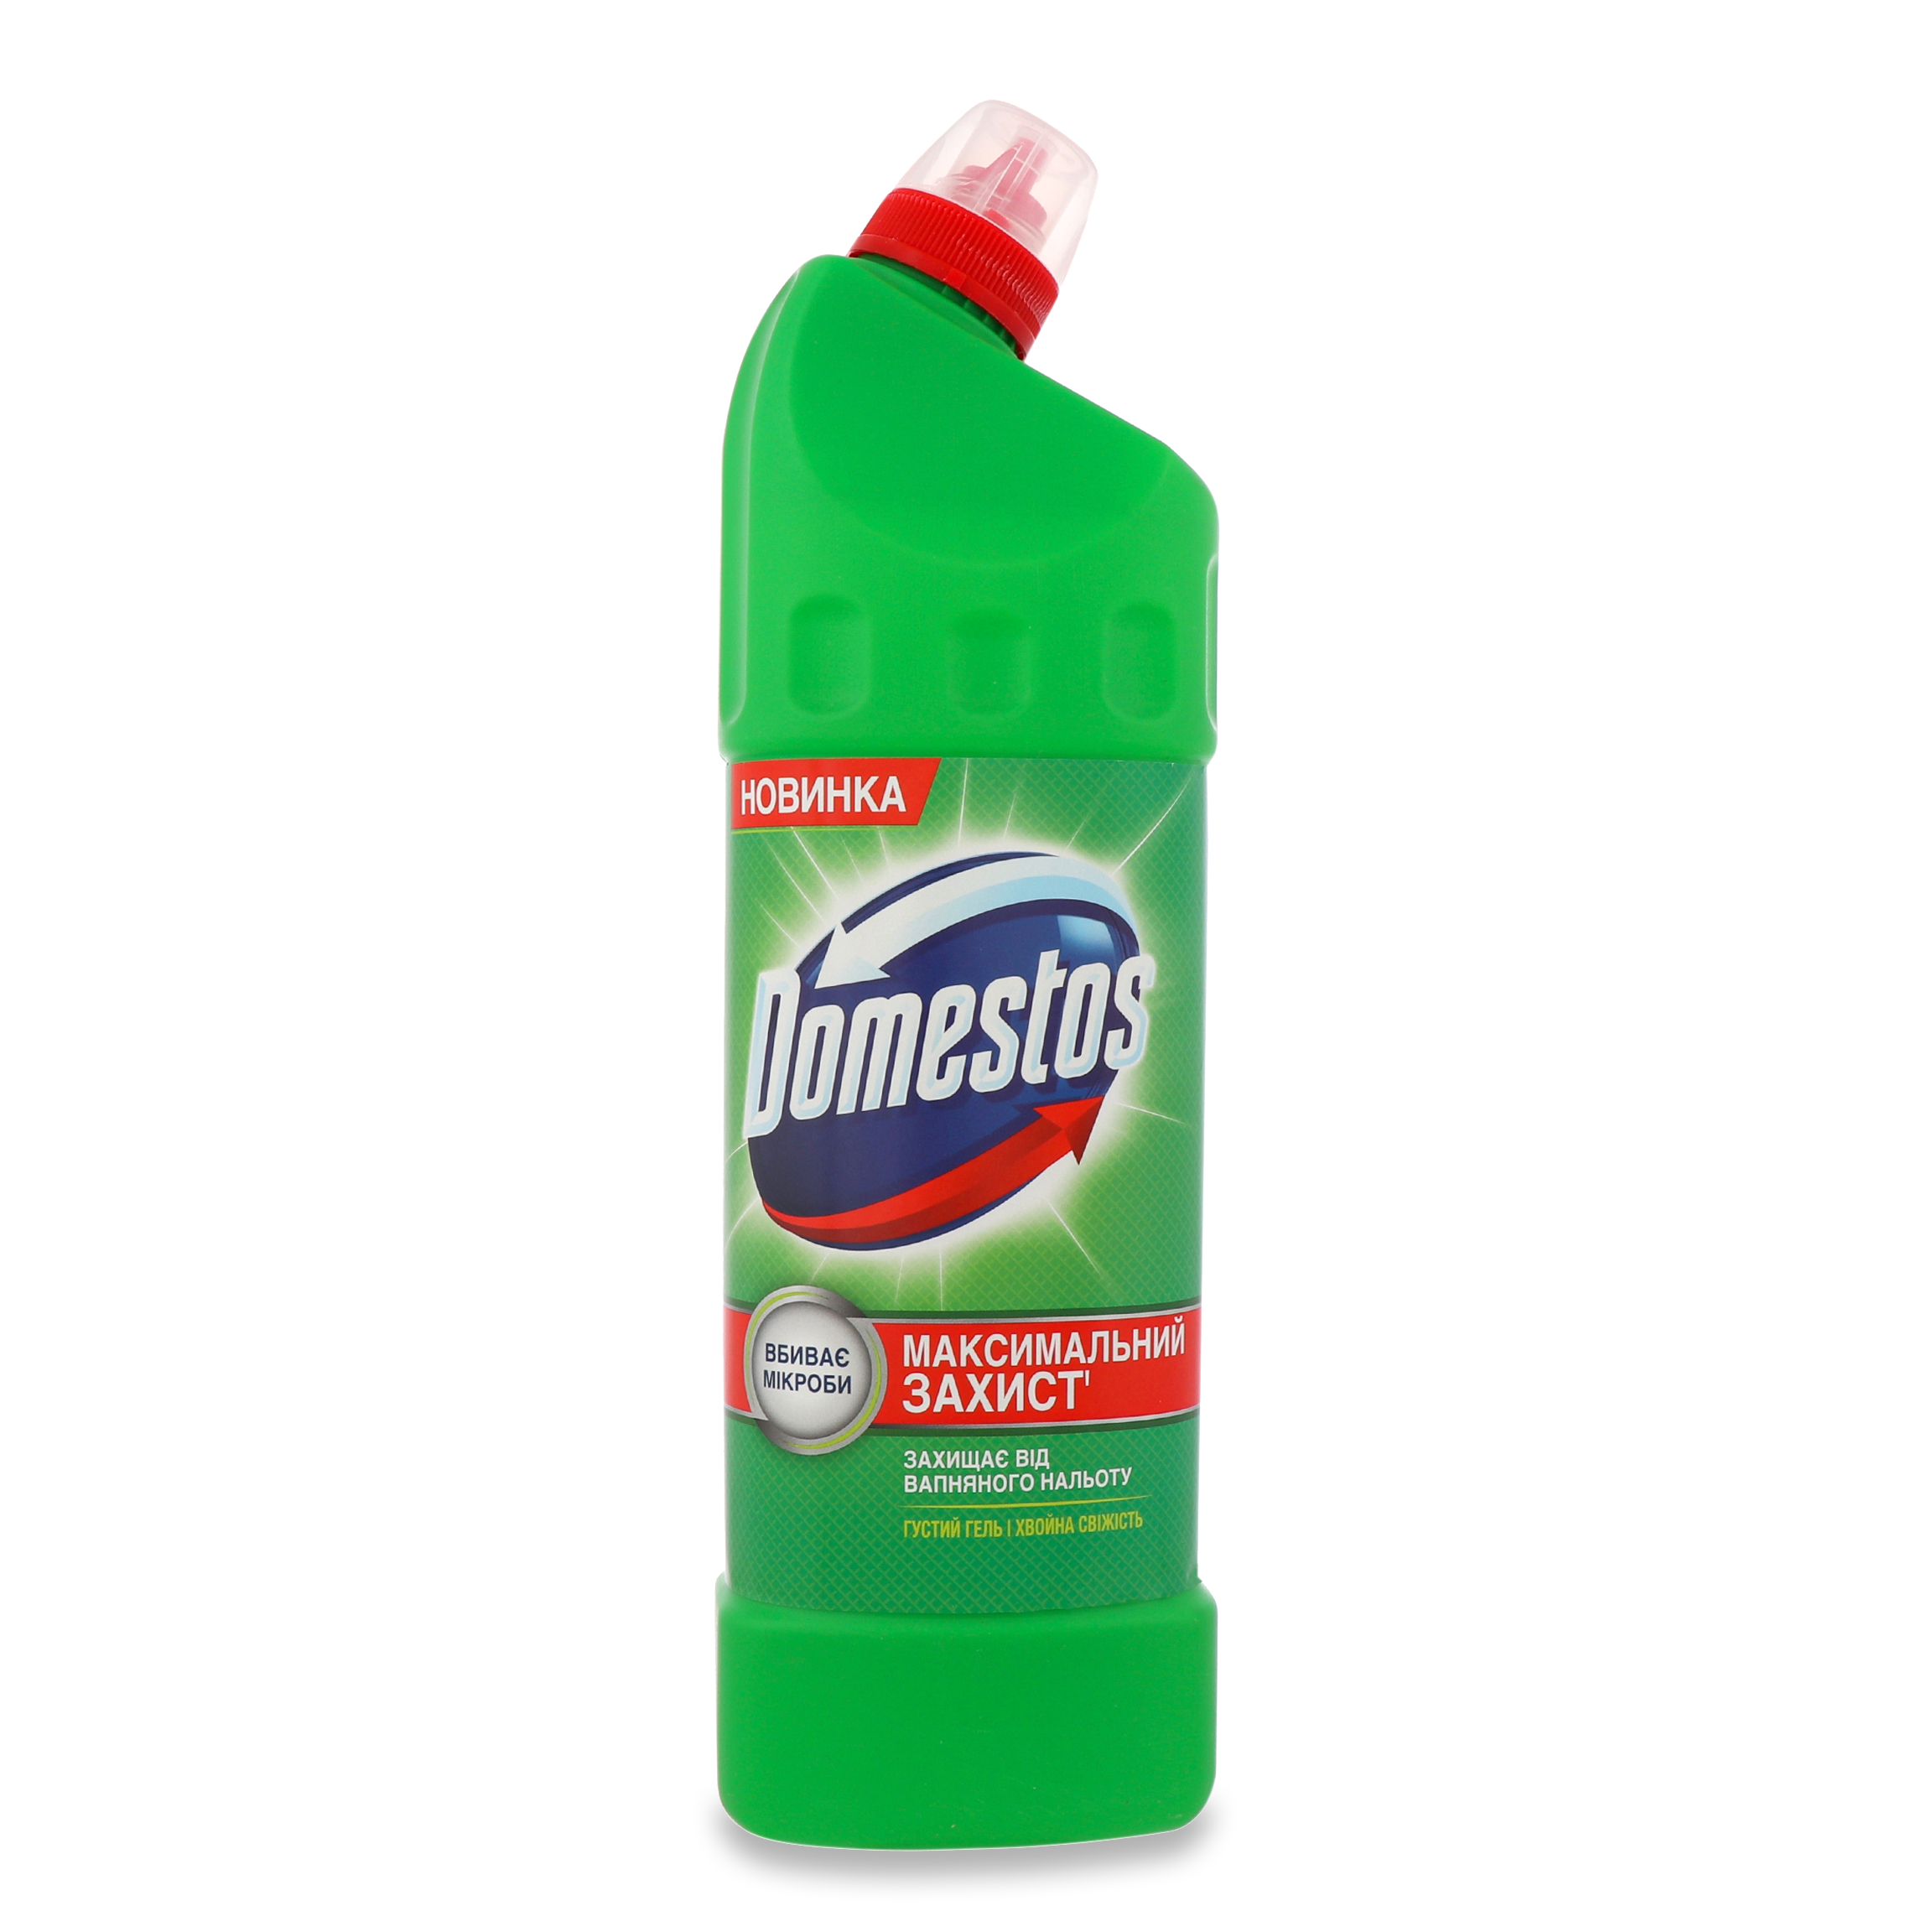 Domestos Cleaner Coniferous freshness of universal 1l